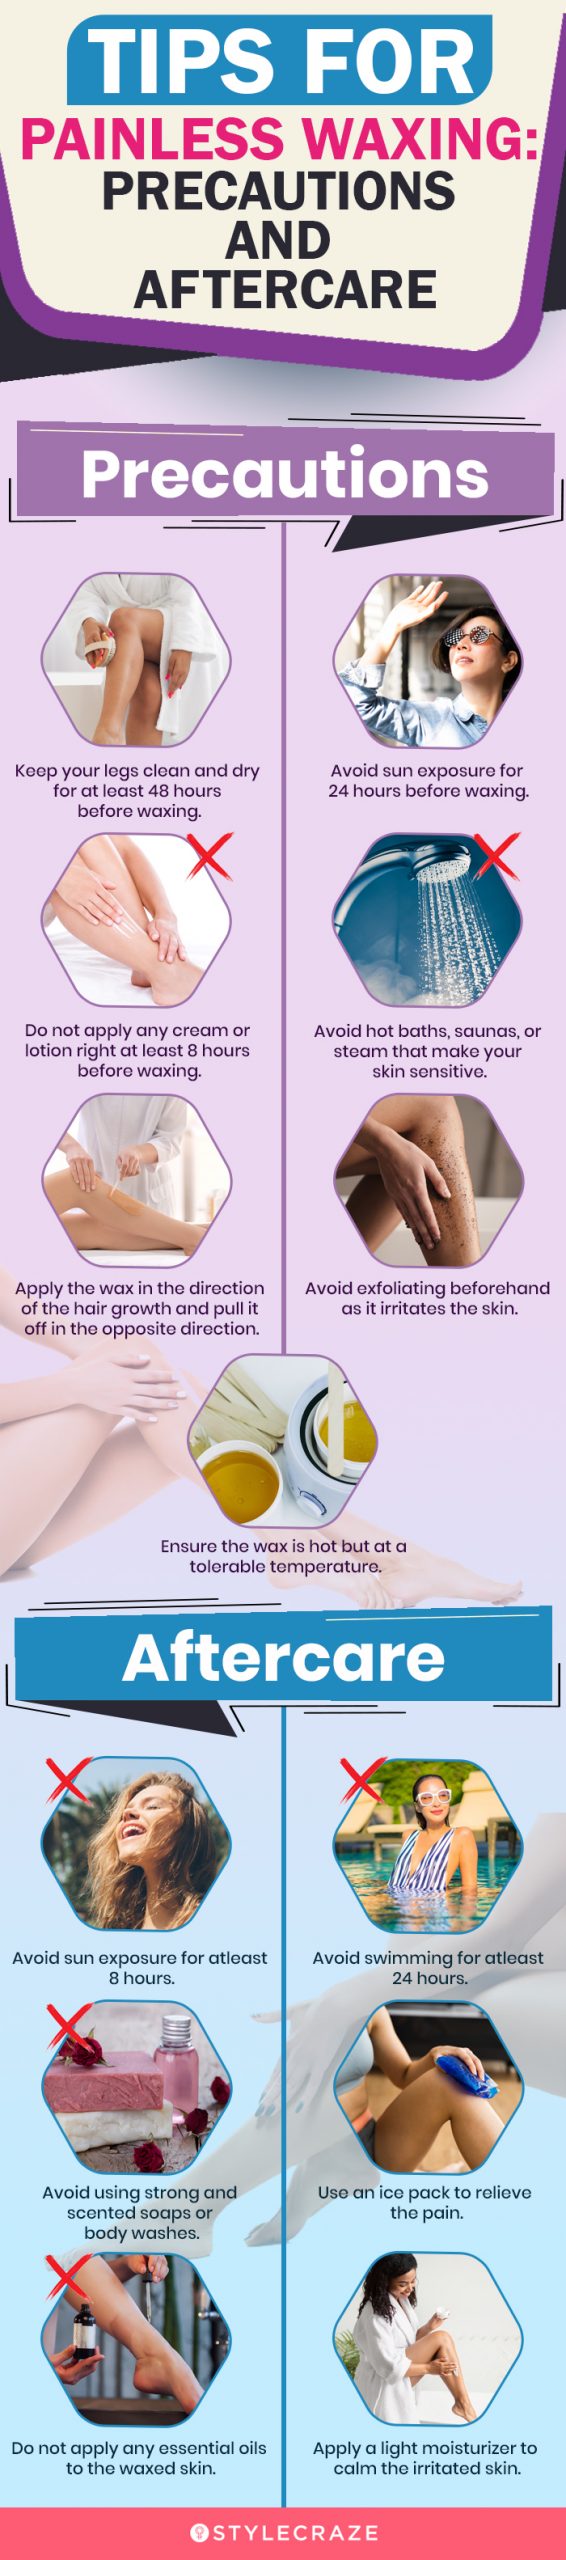 tips for painless waxing [infographic]